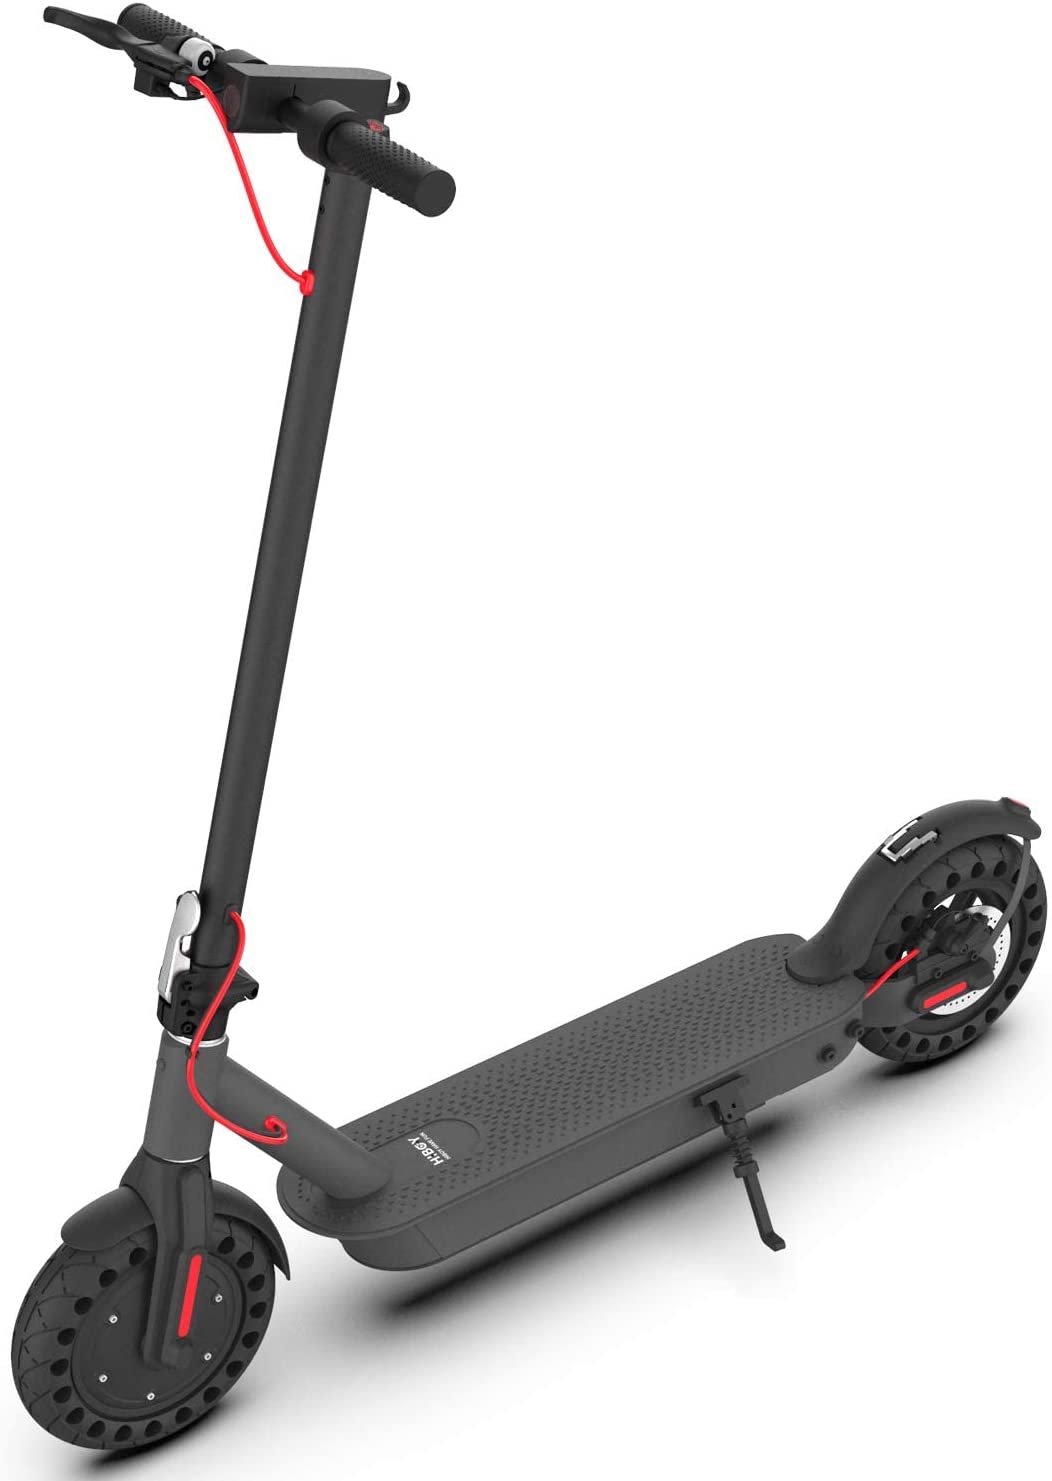 Hiboy S2 Pro Folding Electric Scooter, 500W Motor, 10" Solid Tires